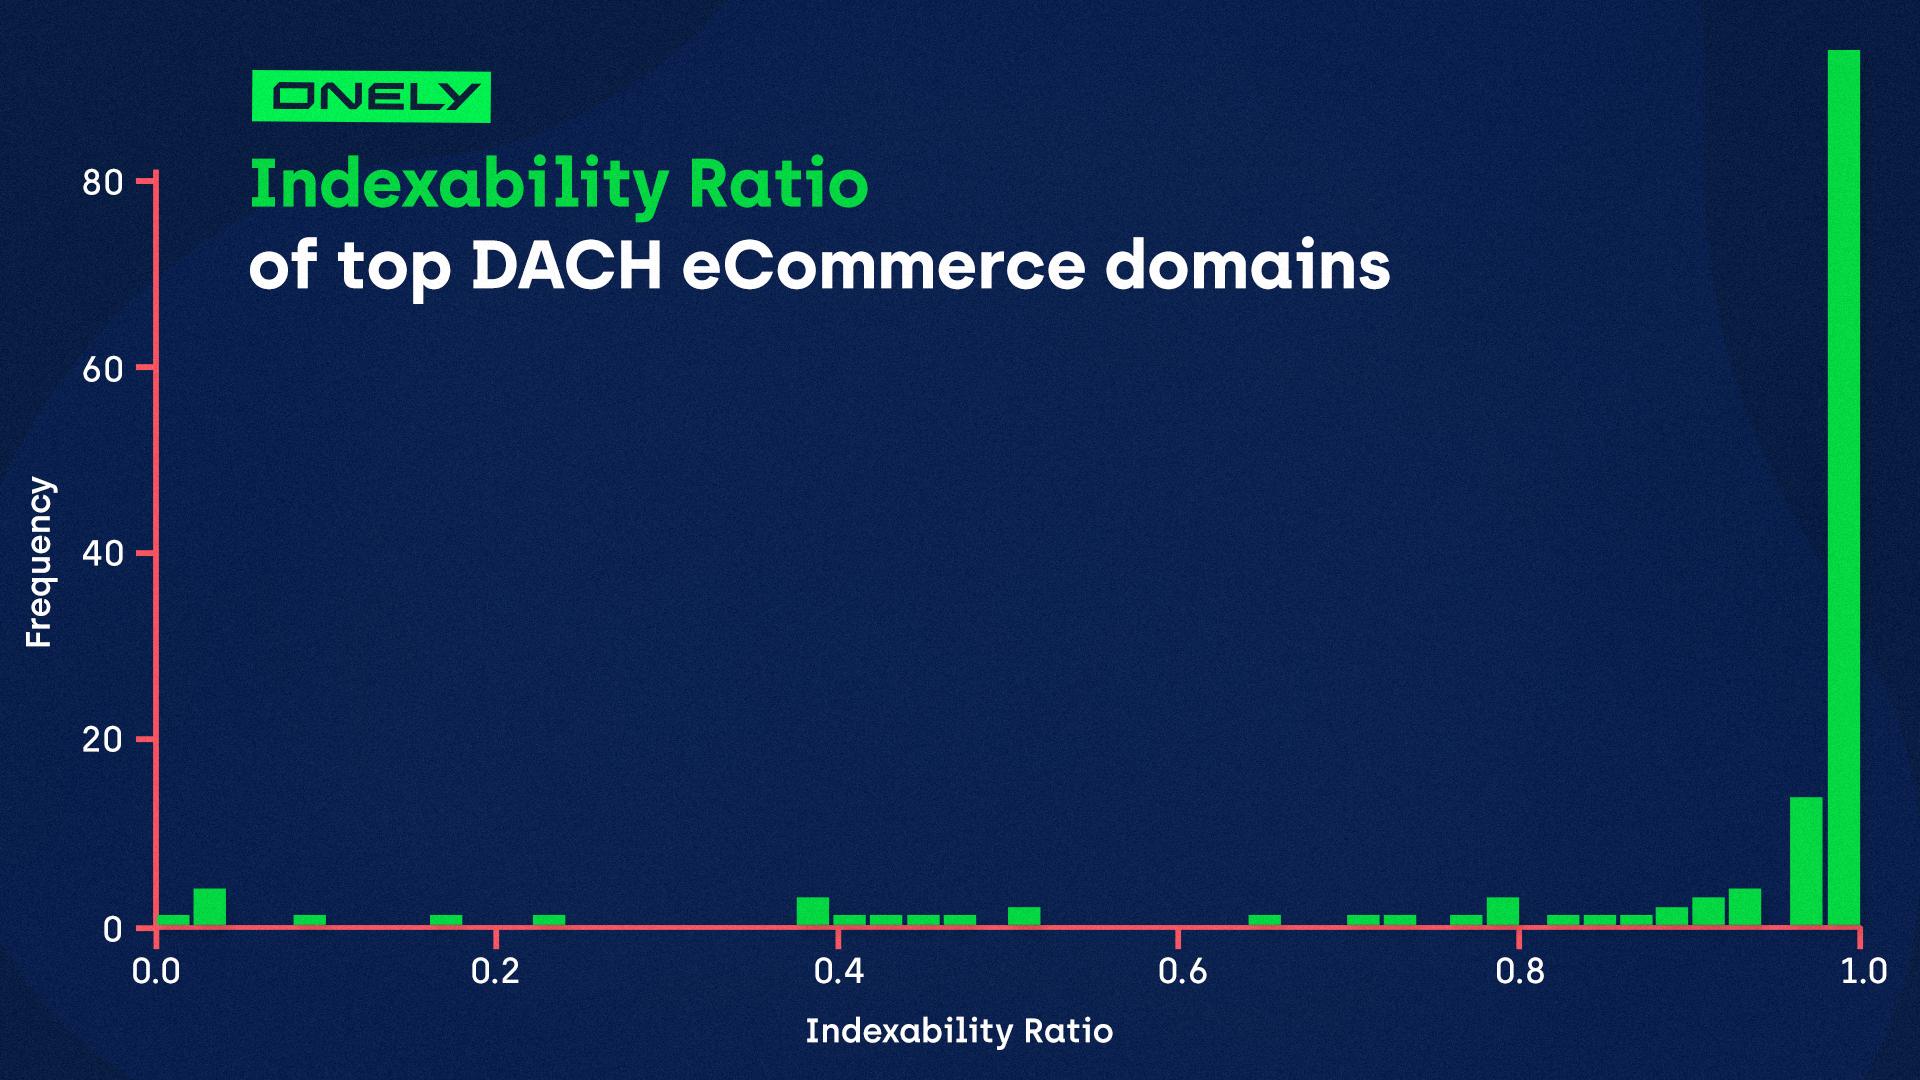 Indexability Ratio of top DACH eCommerce domains presented on a line chart